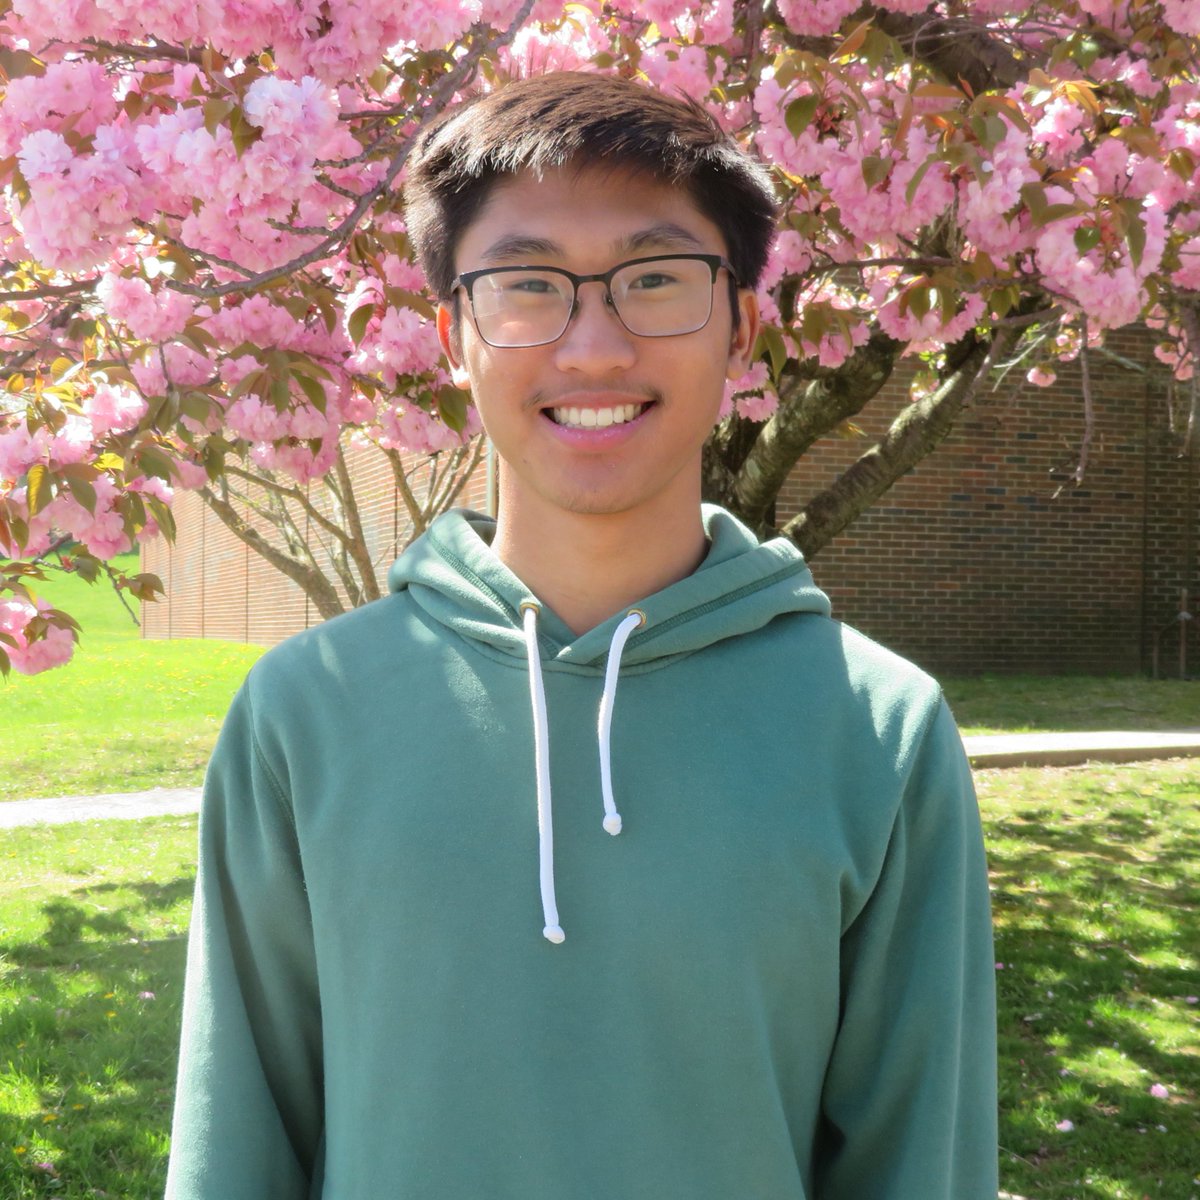 Lydia Jung (101.25 GPA) and Timothy Ty (101.02 GPA) have been named the CHSS Class of 2024 valedictorian and salutatorian! Read all about these impressive #ClarkstownCSD students on FB and IG. Congratulations!